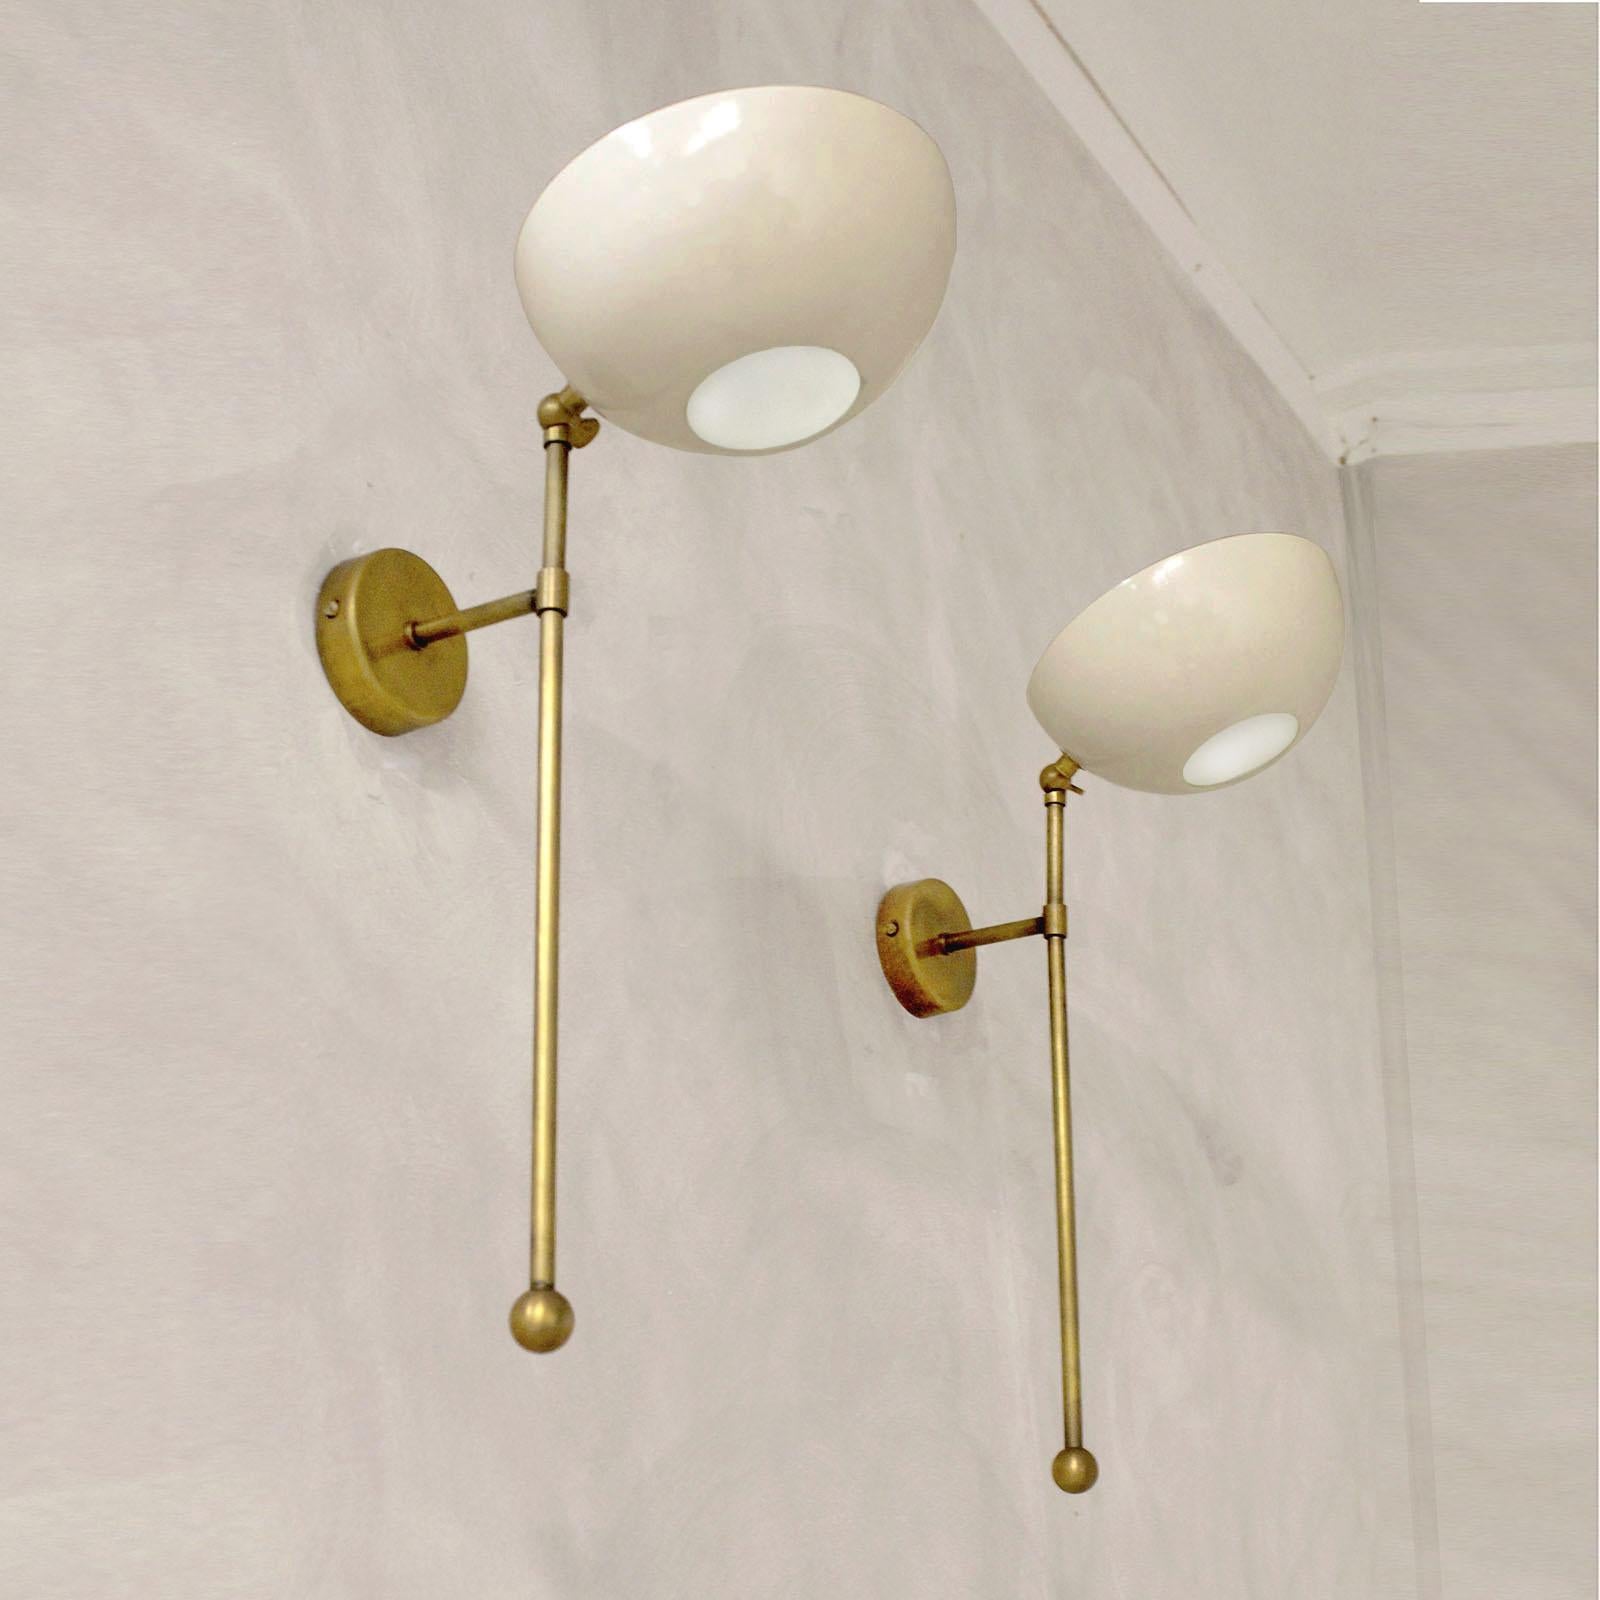 Beautiful pair of wall lights, made of brass and lacquered metal, adjustable shades, painted in ivory.

Customization:
Customizable colors (any RAL code color), available in polished brass, patinated brass, nickel finish. Dimensions slightly